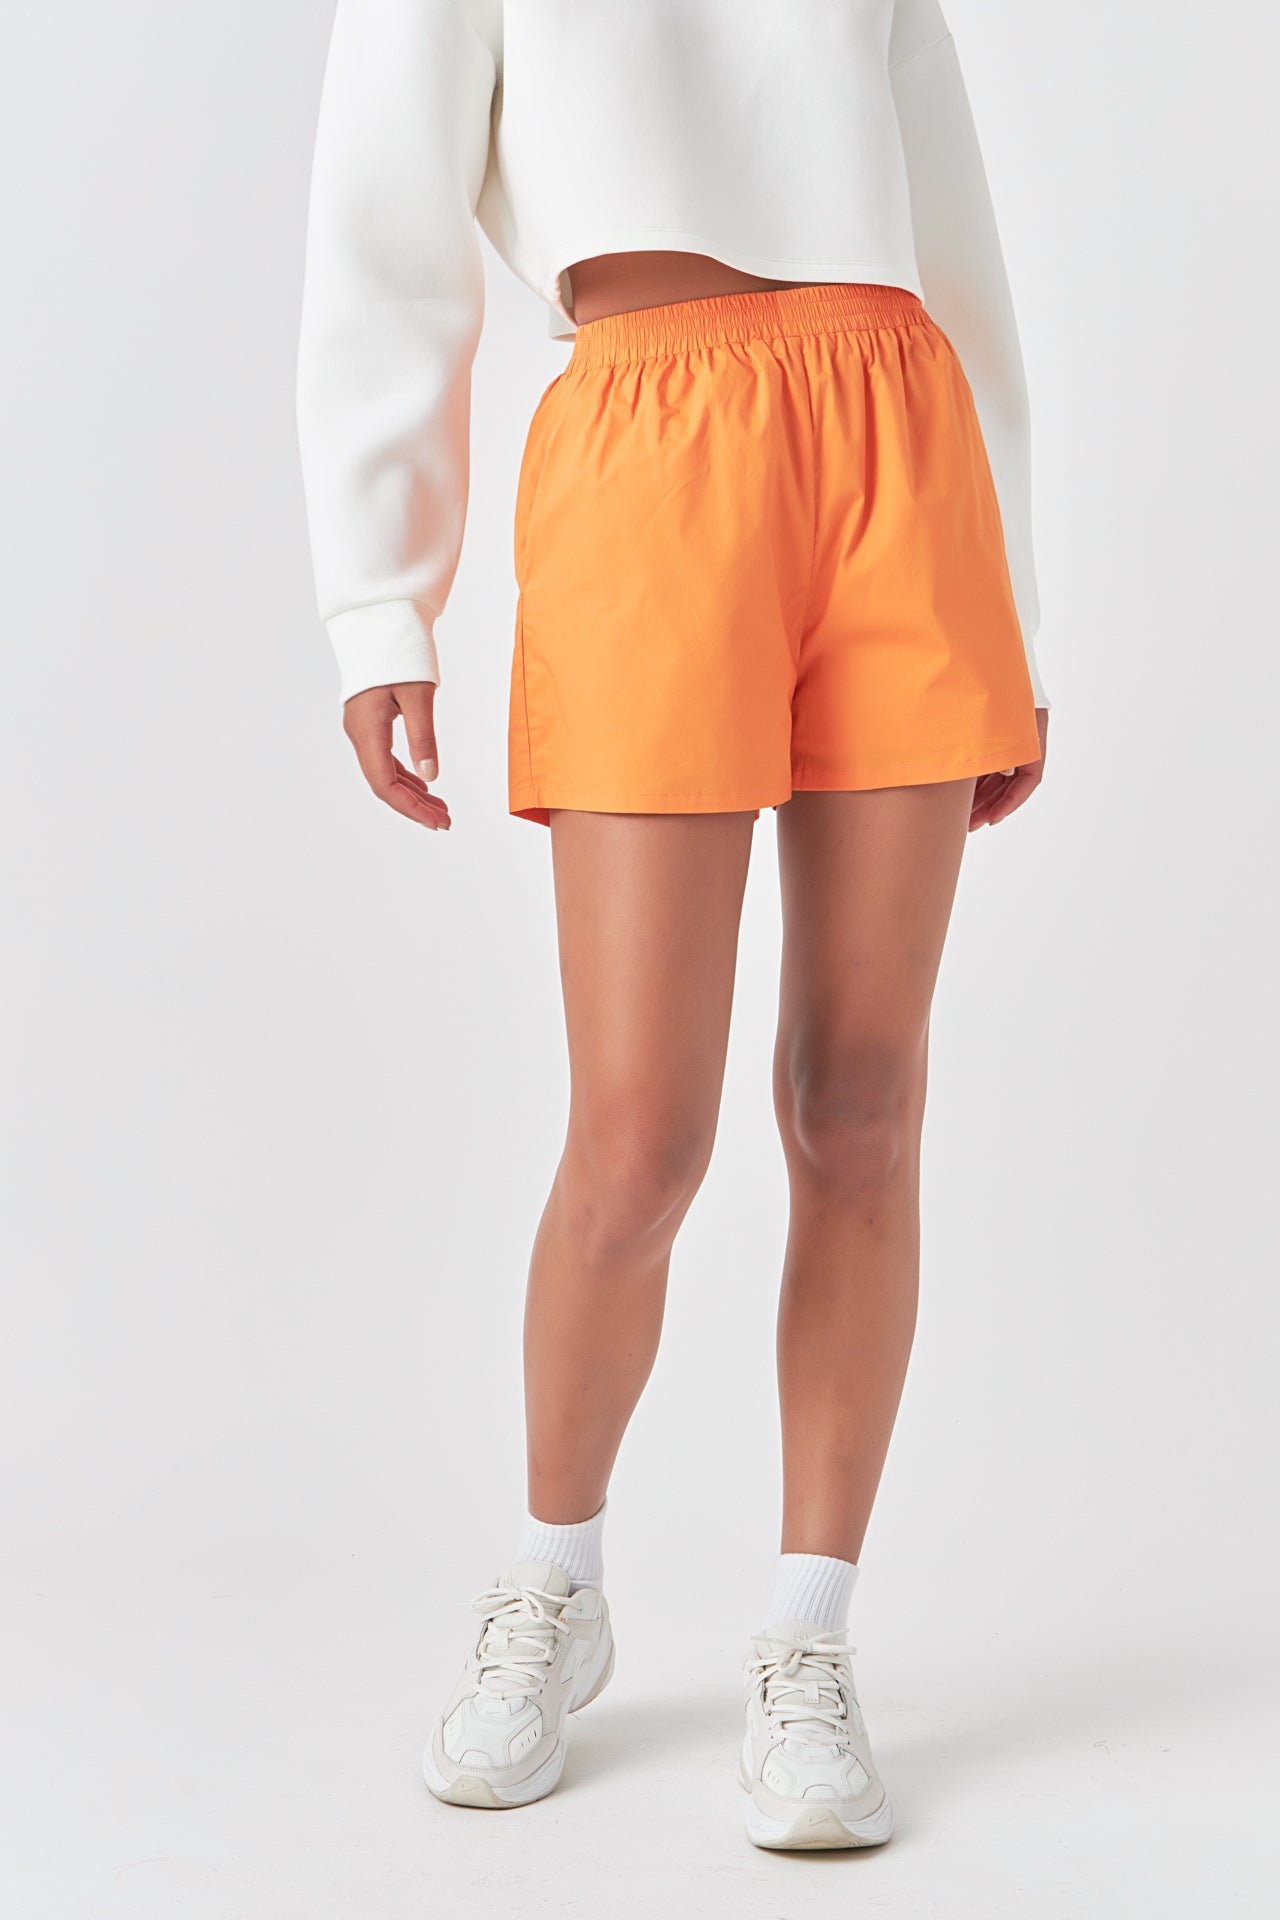 GREY LAB - Boyfriend Shorts - SHORTS available at Objectrare